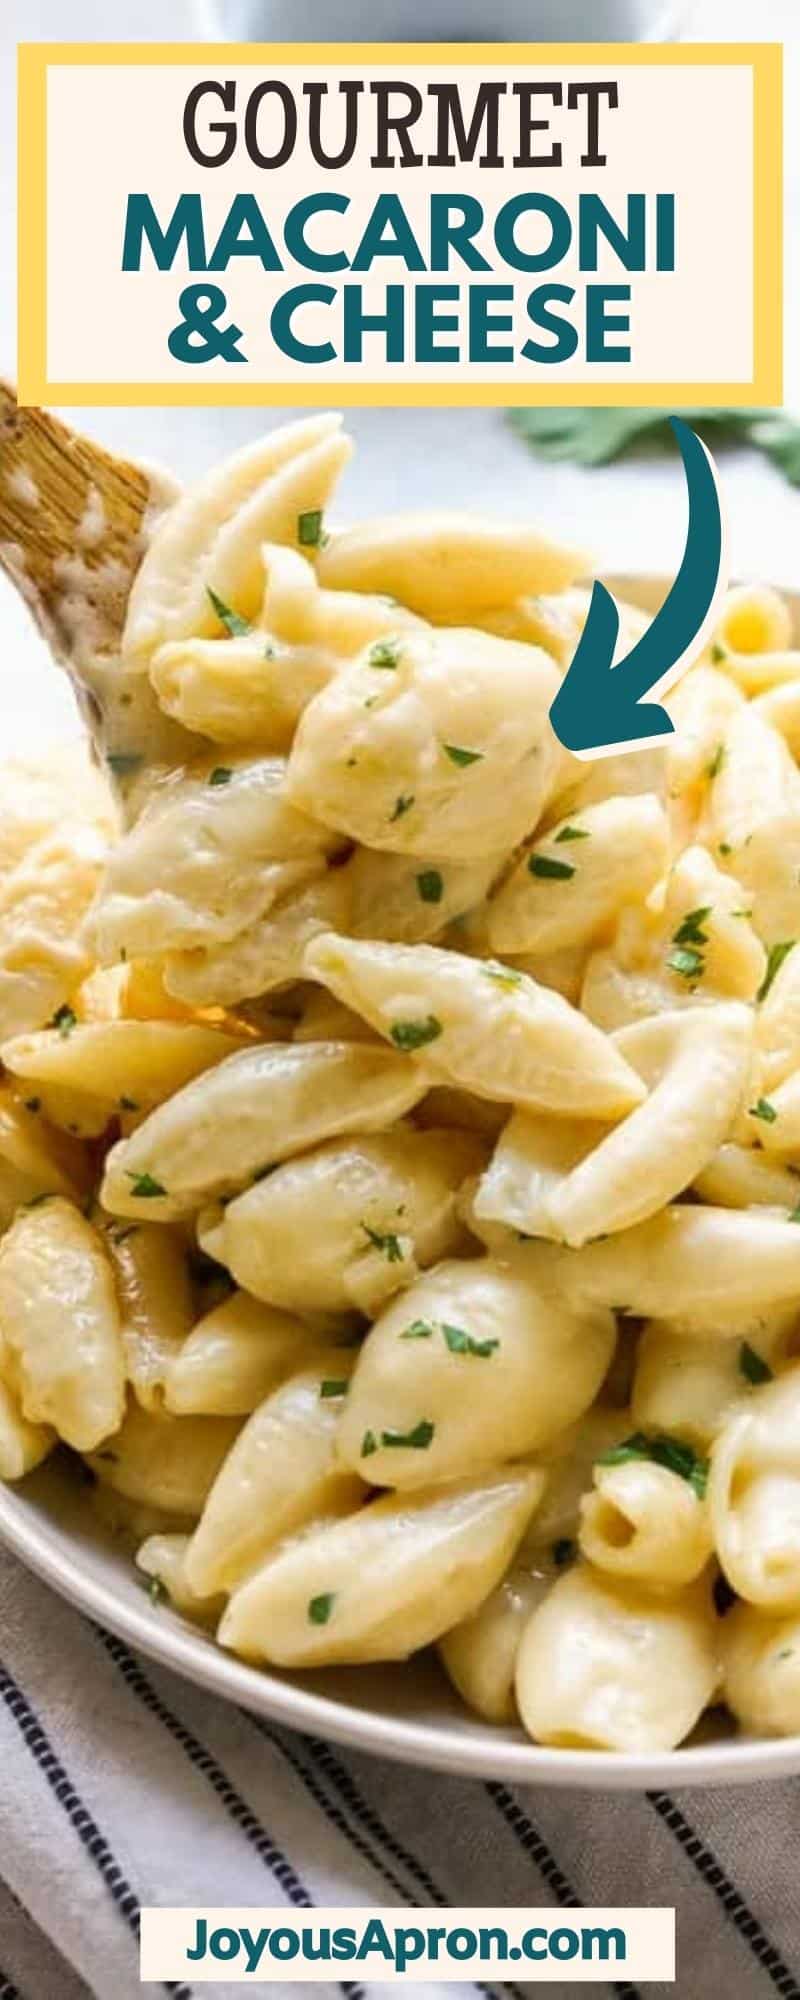 Macaroni and Cheese - a gourmet, adult and grown up version of mac and cheese, made with heavy cream, American cheese and white cheddar. Pasta is coated in a thick, creamy delicious cheese sauce. It's the classic all-American side dish for dinners and even the holidays! via @joyousapron